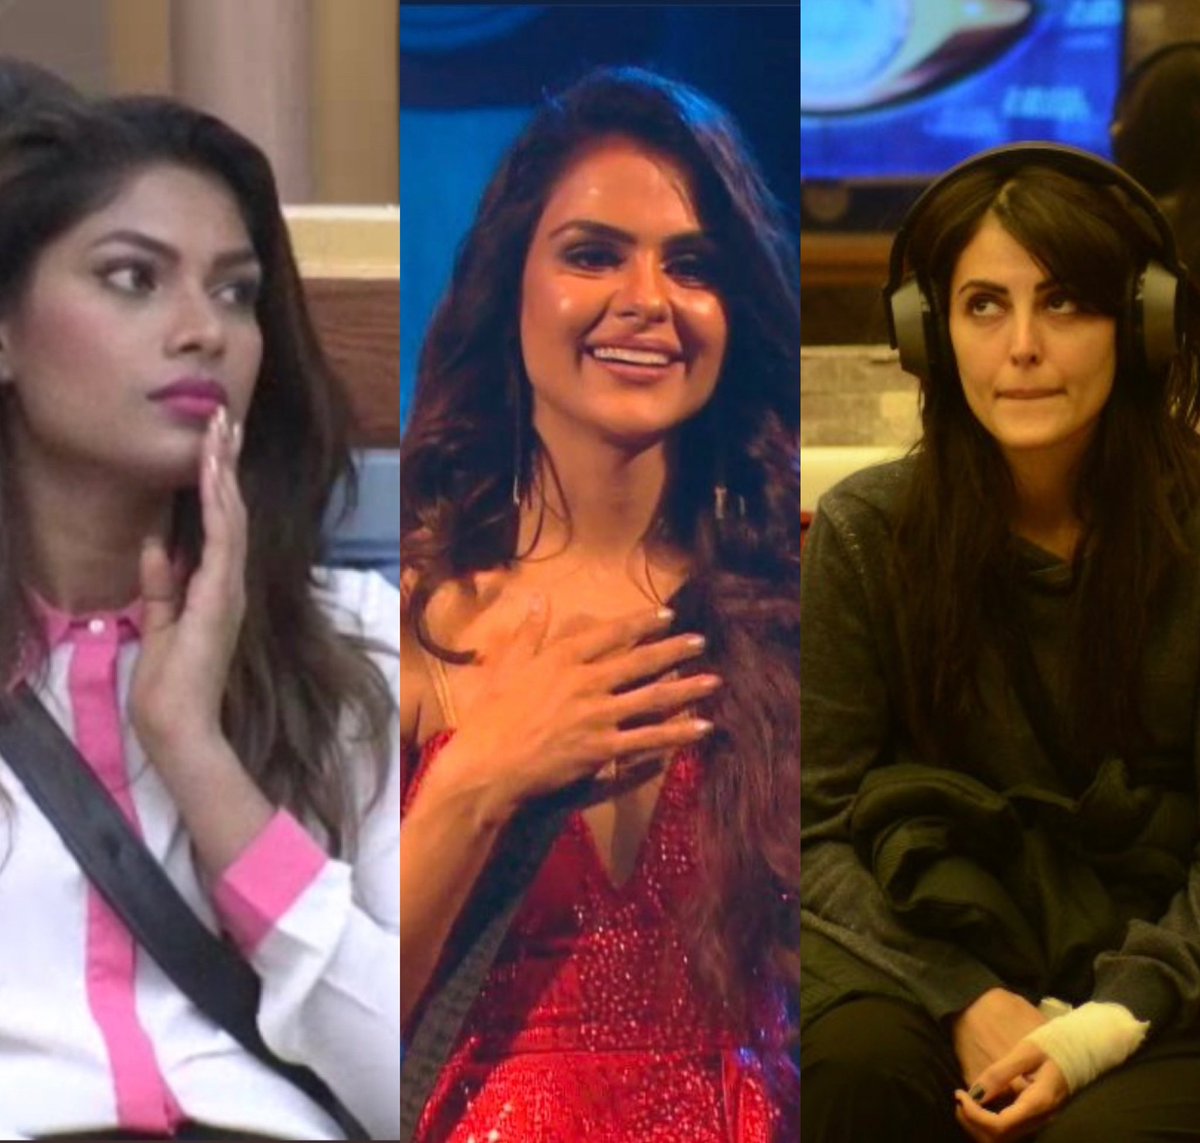 ladies who deserved to win but end up at 3rd position. my strong girls ❤️

#LopamudraRaut
#PriyankaChaharChoudhary 
#MandanaKarimi